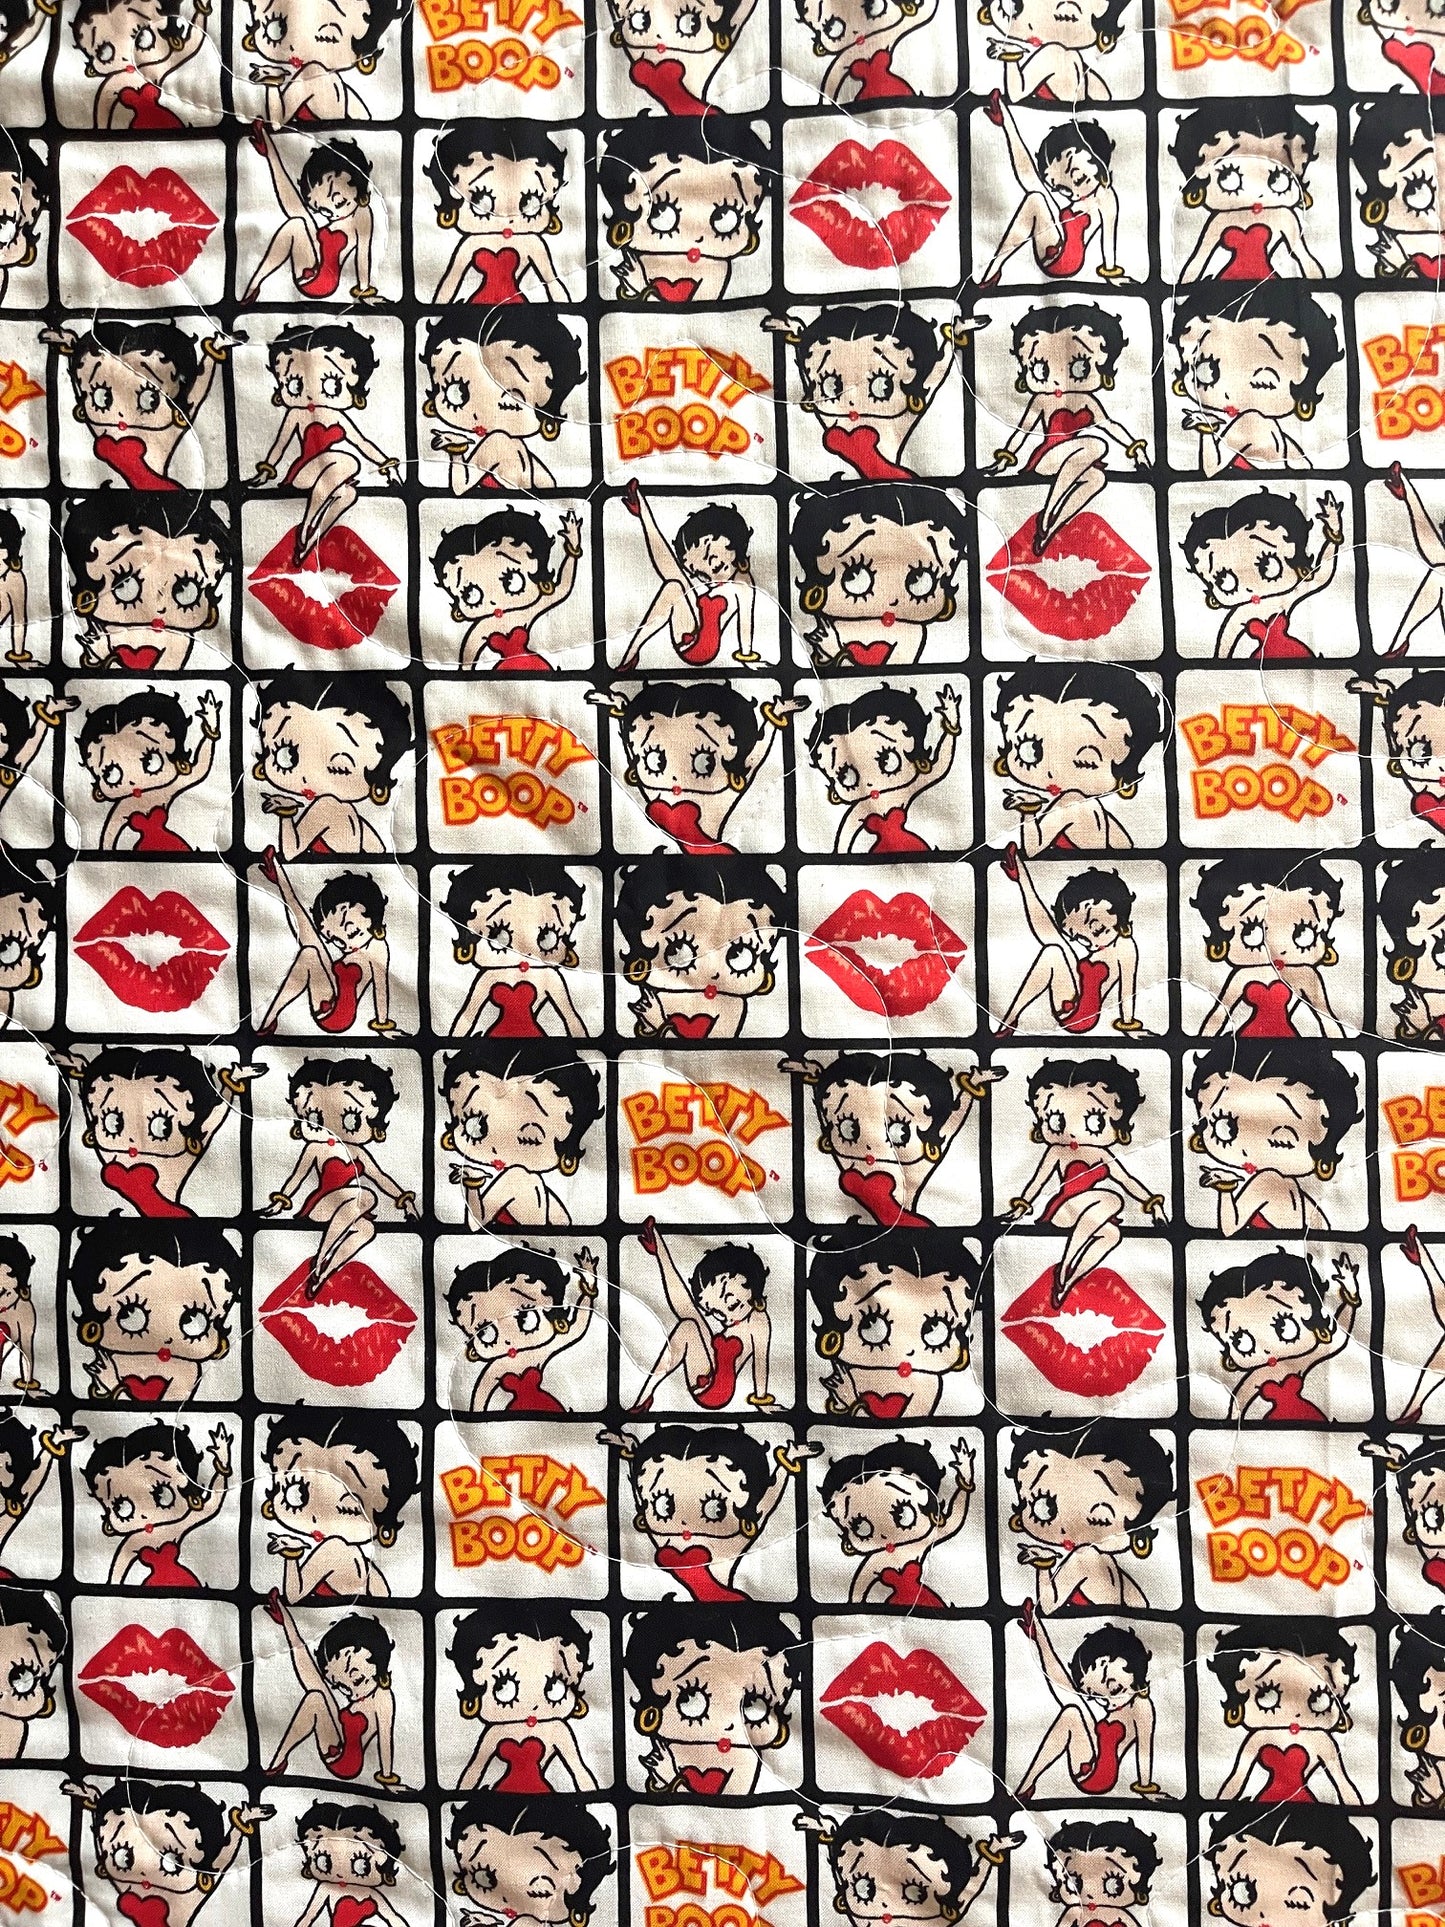 BETTY BOOP CARTOON INSPIRED QUILTED BLANKET